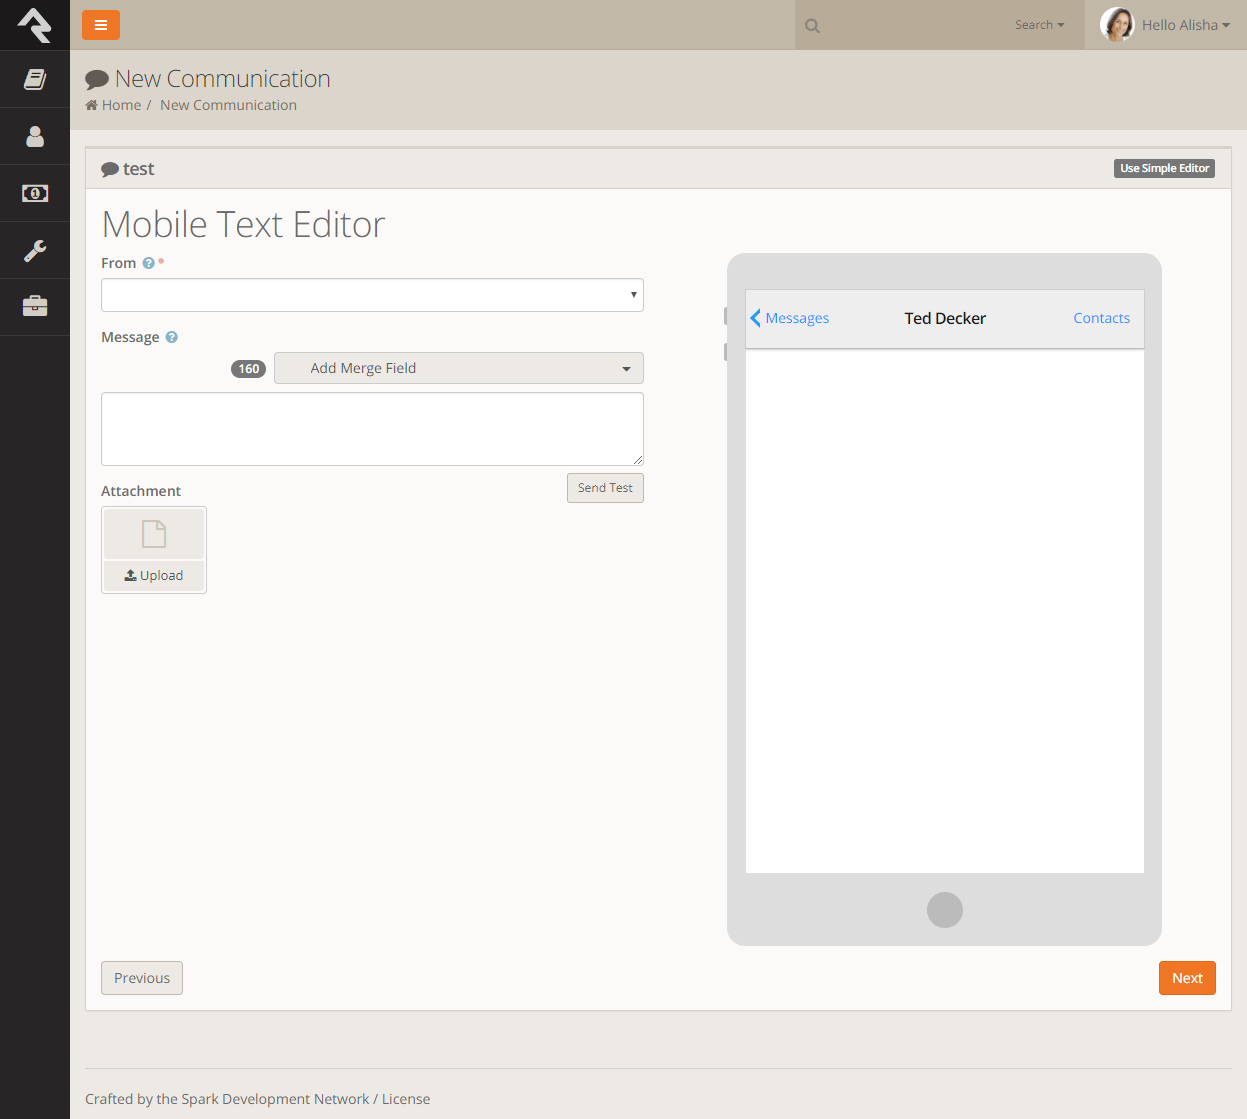 Mobile Text Editor